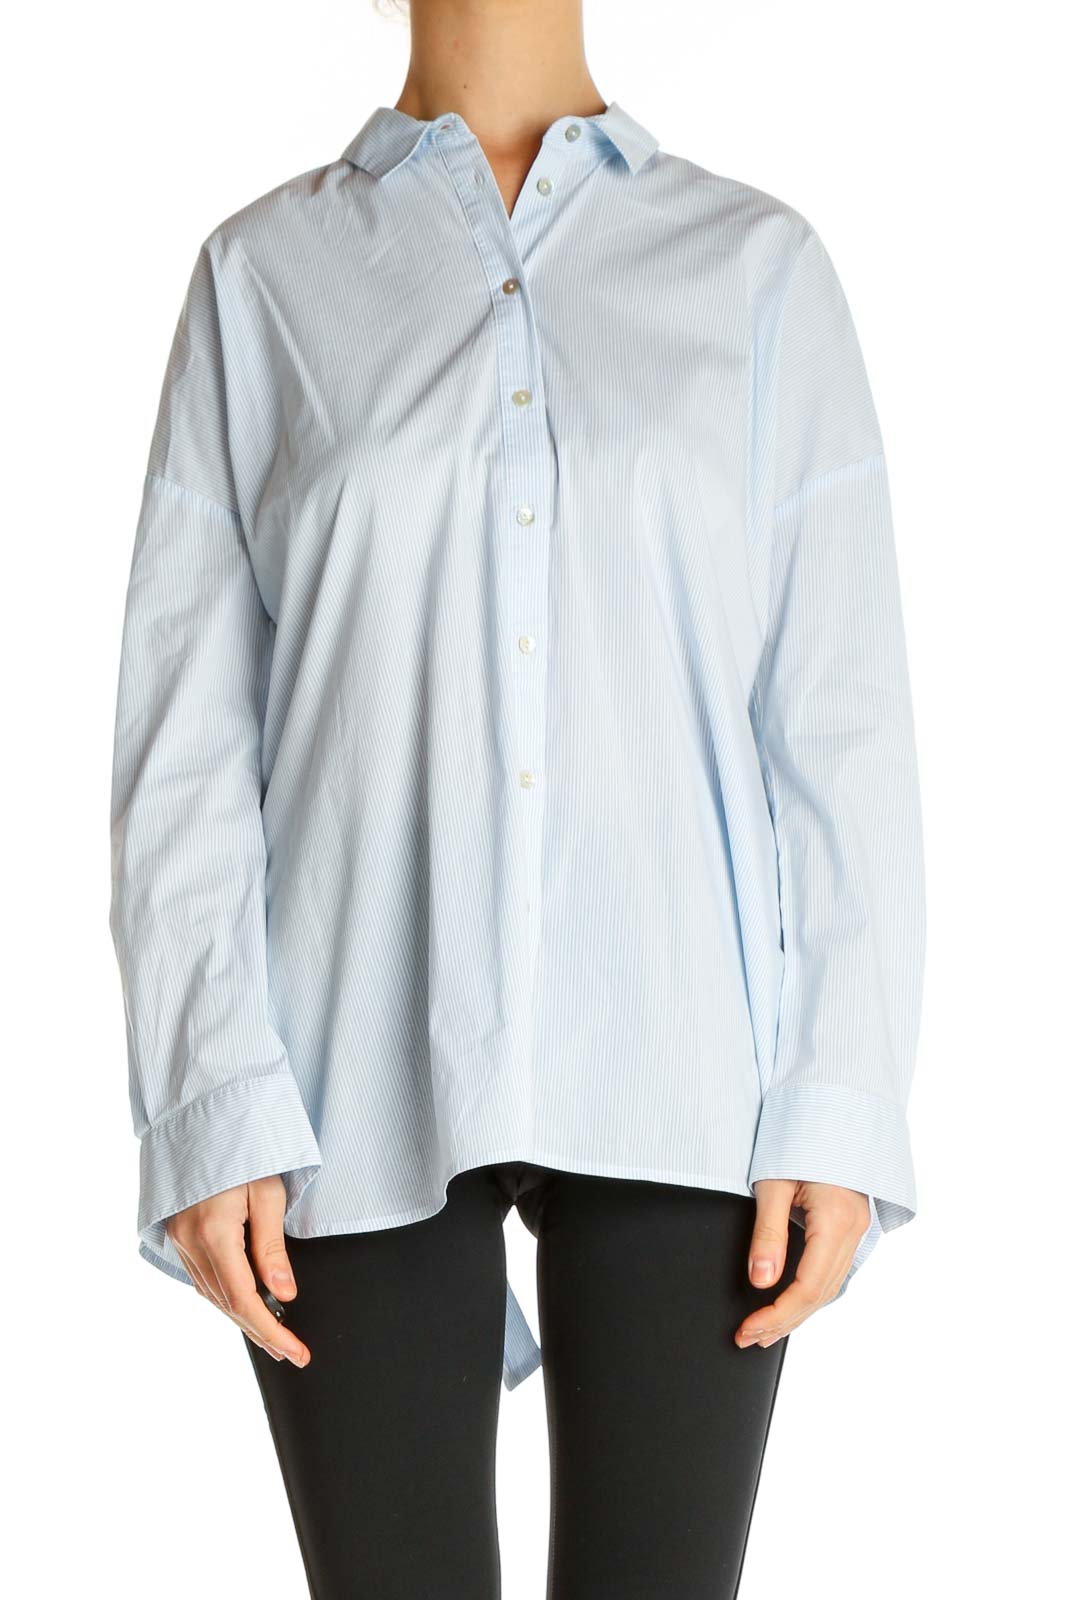 White Solid Formal Shirt Front